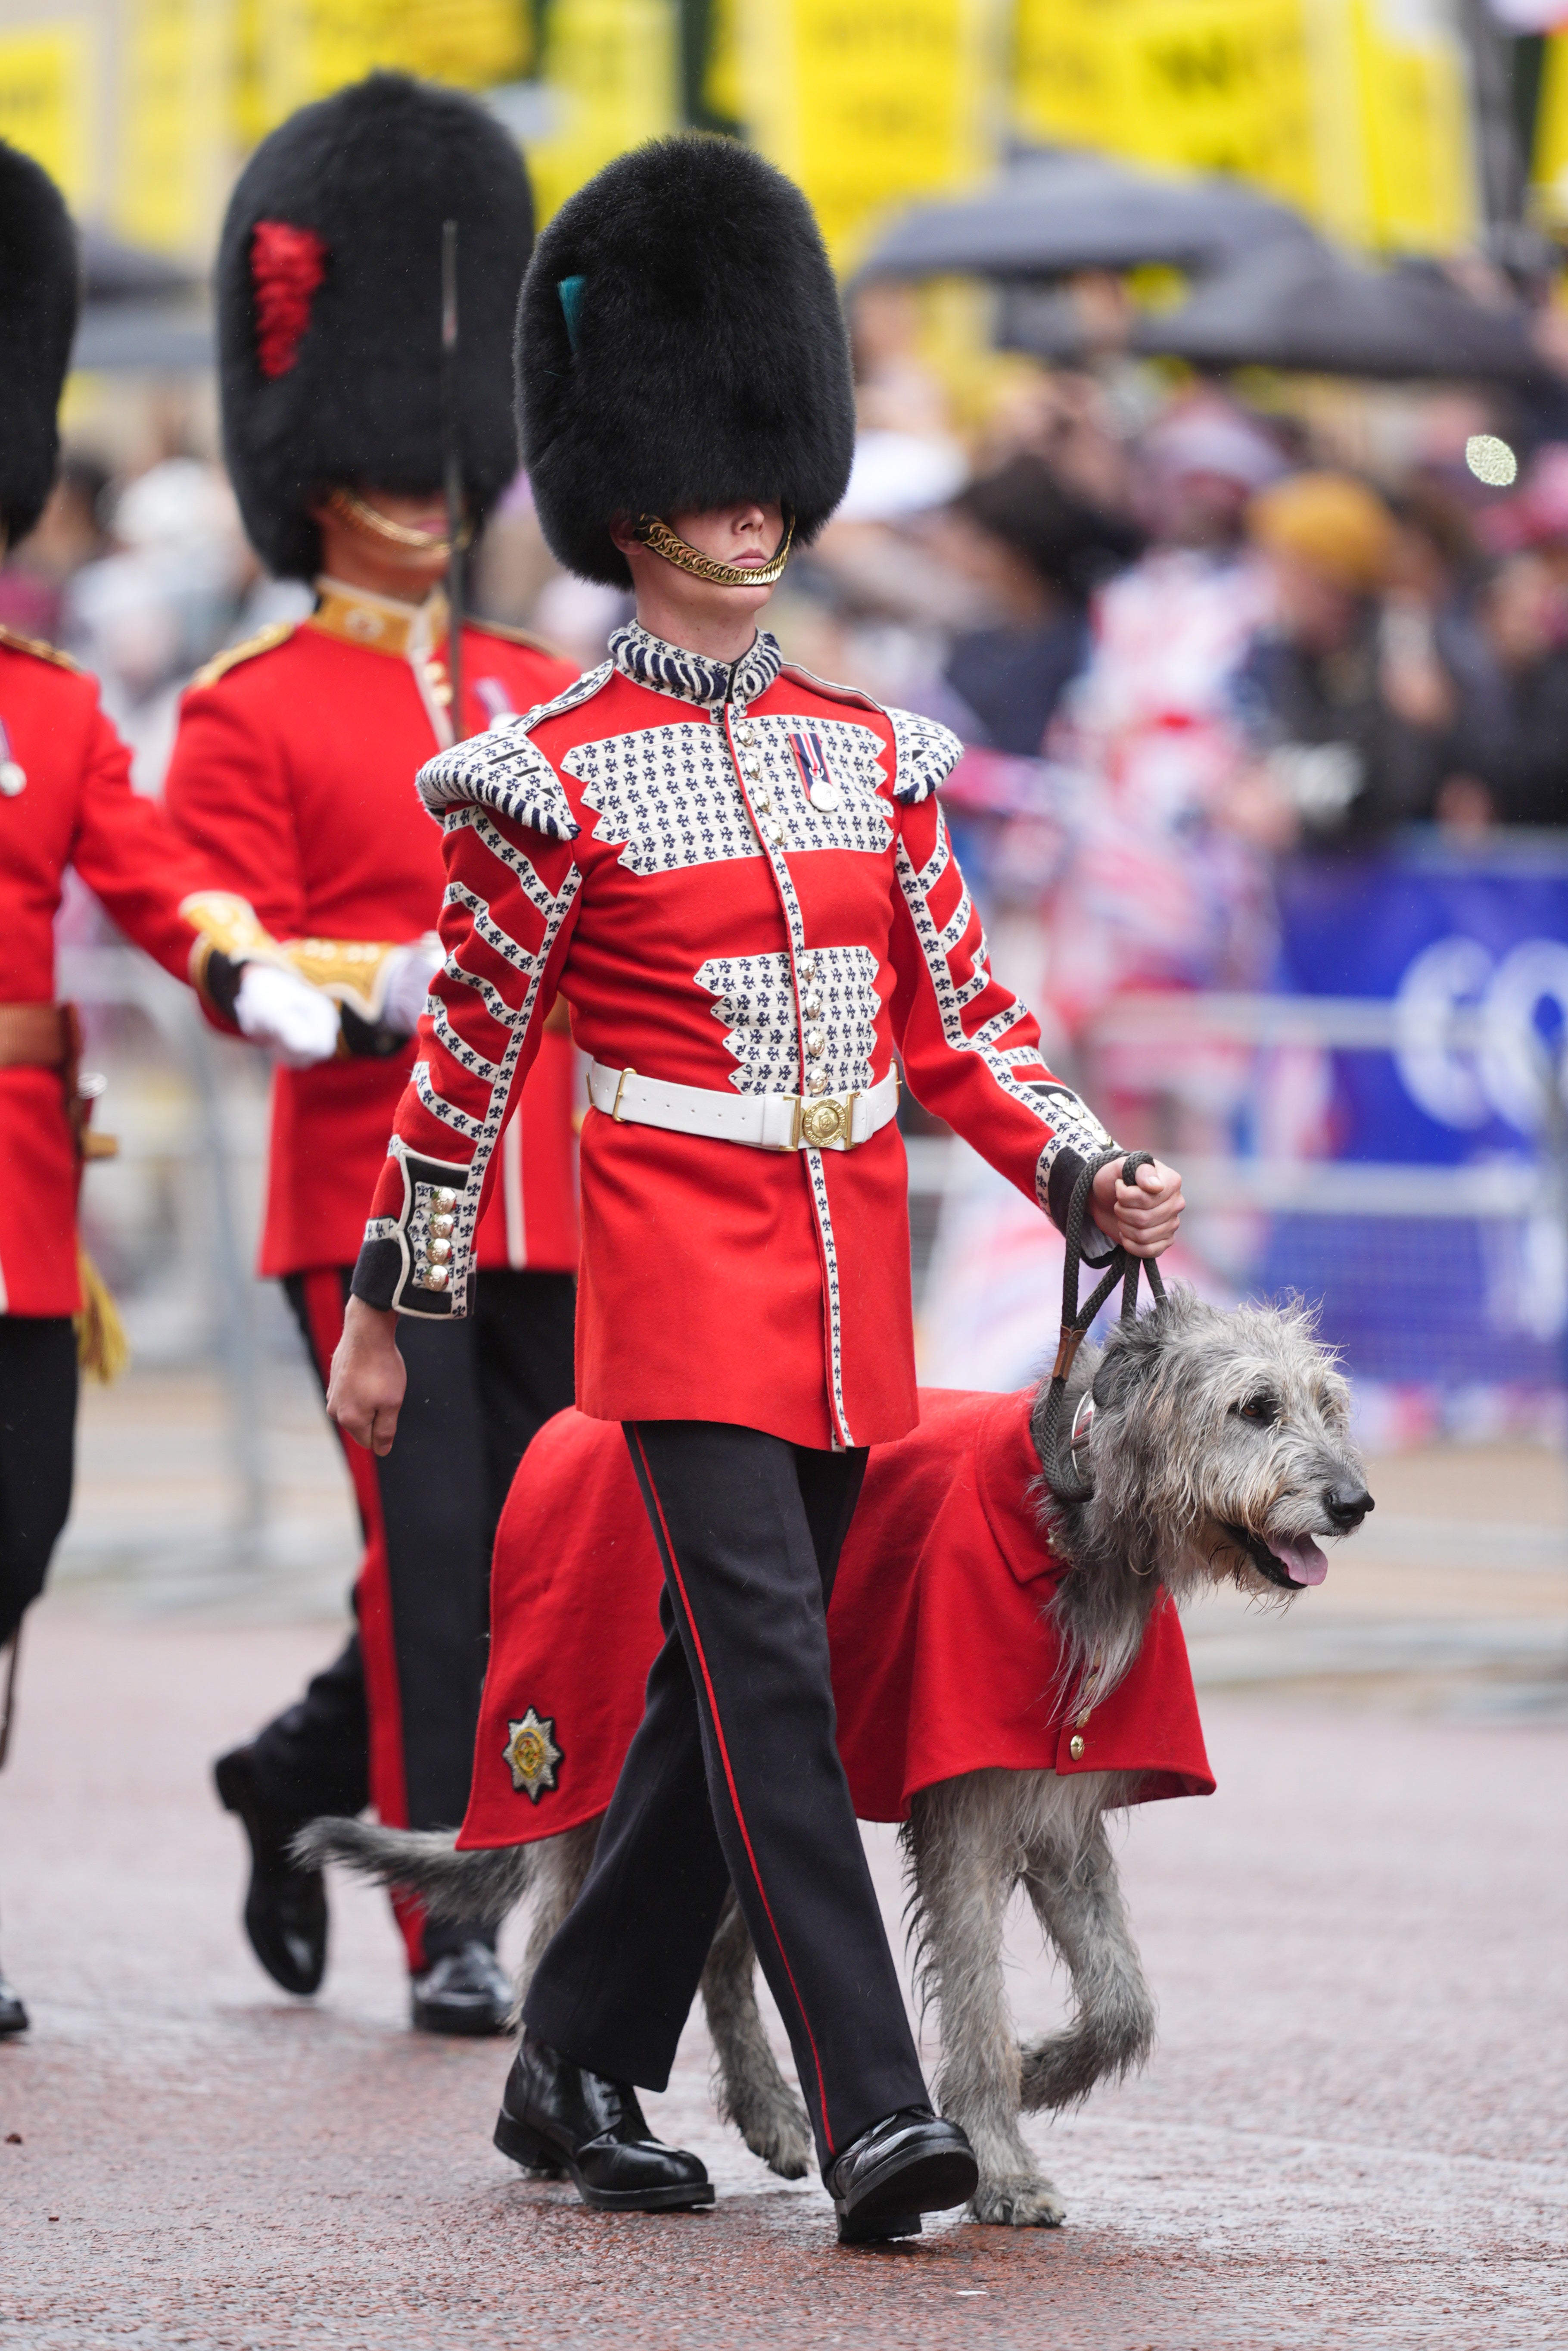 The official mascot of the Irish Guards, a wolfhound Seamus, has been the event's mascot for three years.